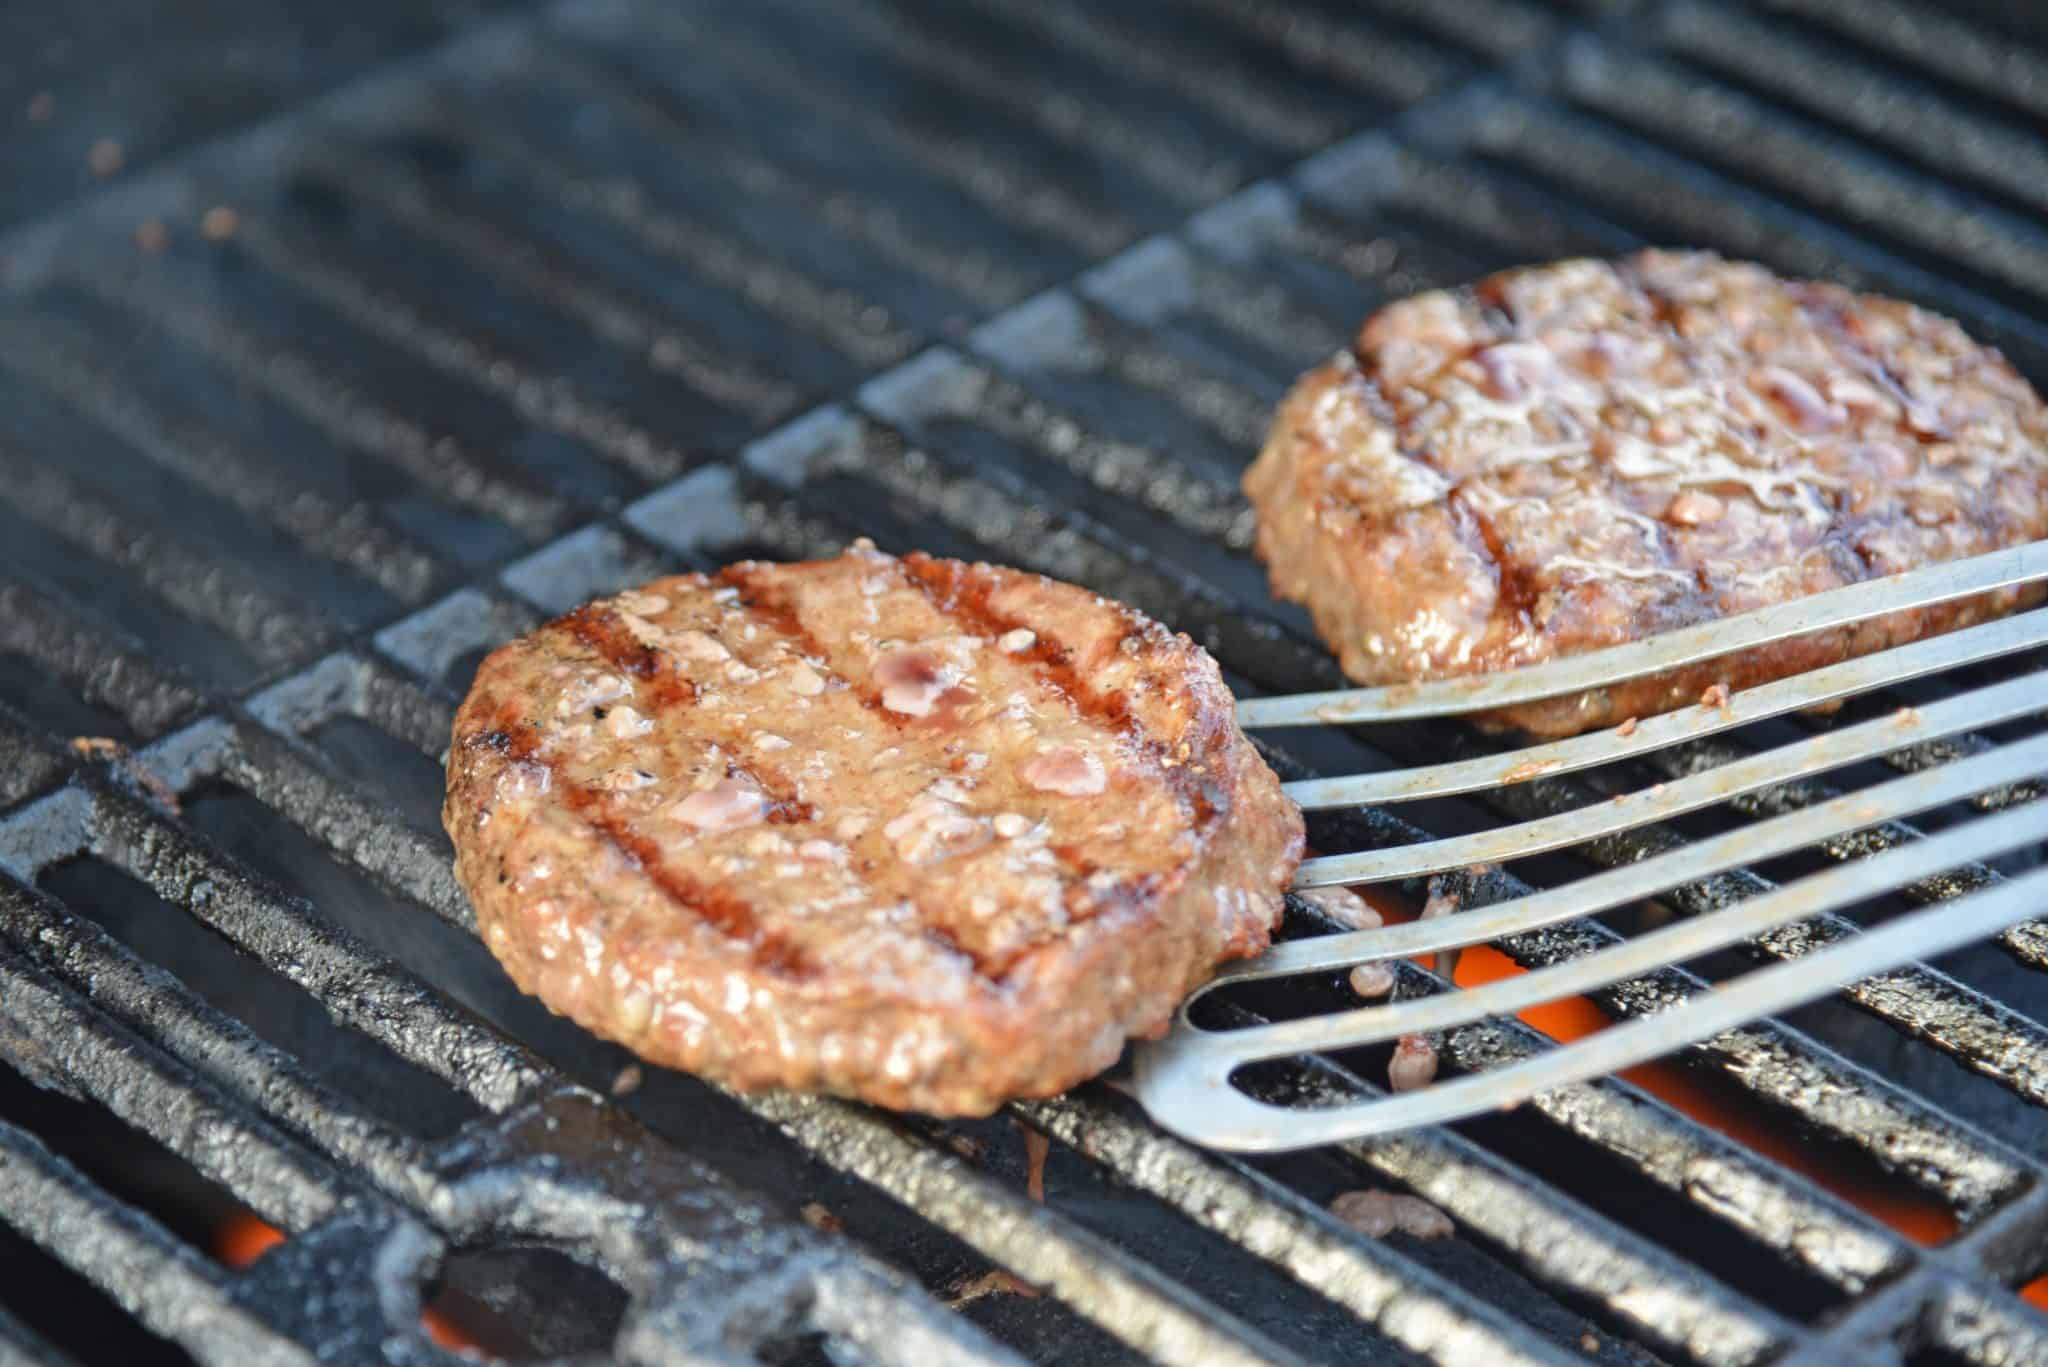 Burger patties on the grill. 